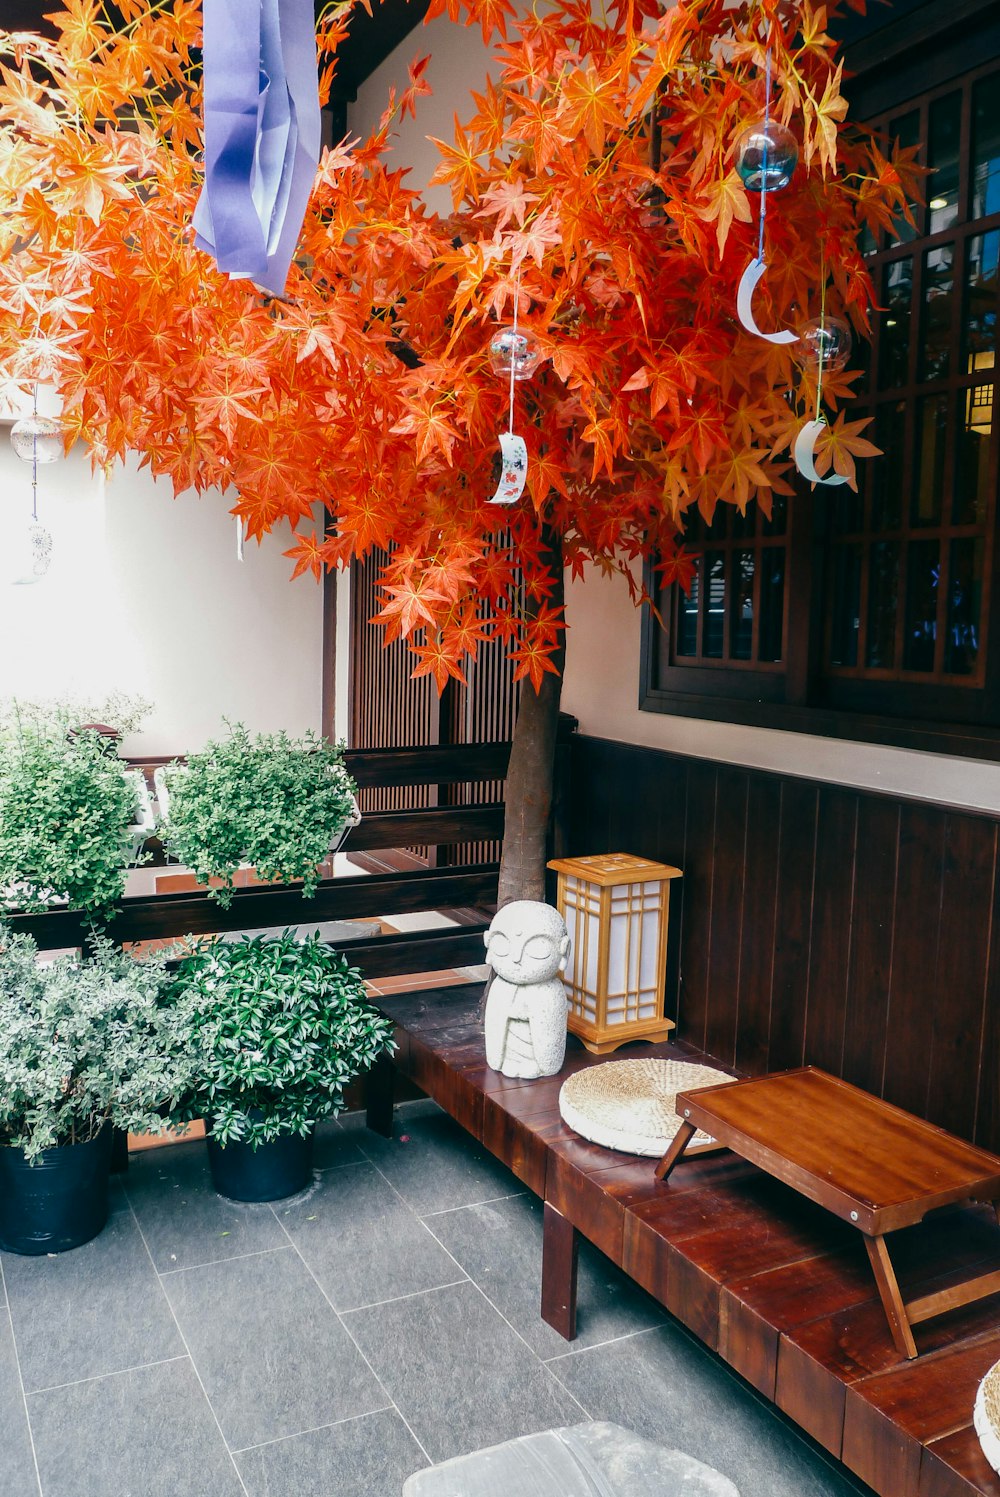 a wooden bench sitting under a tree filled with orange leaves